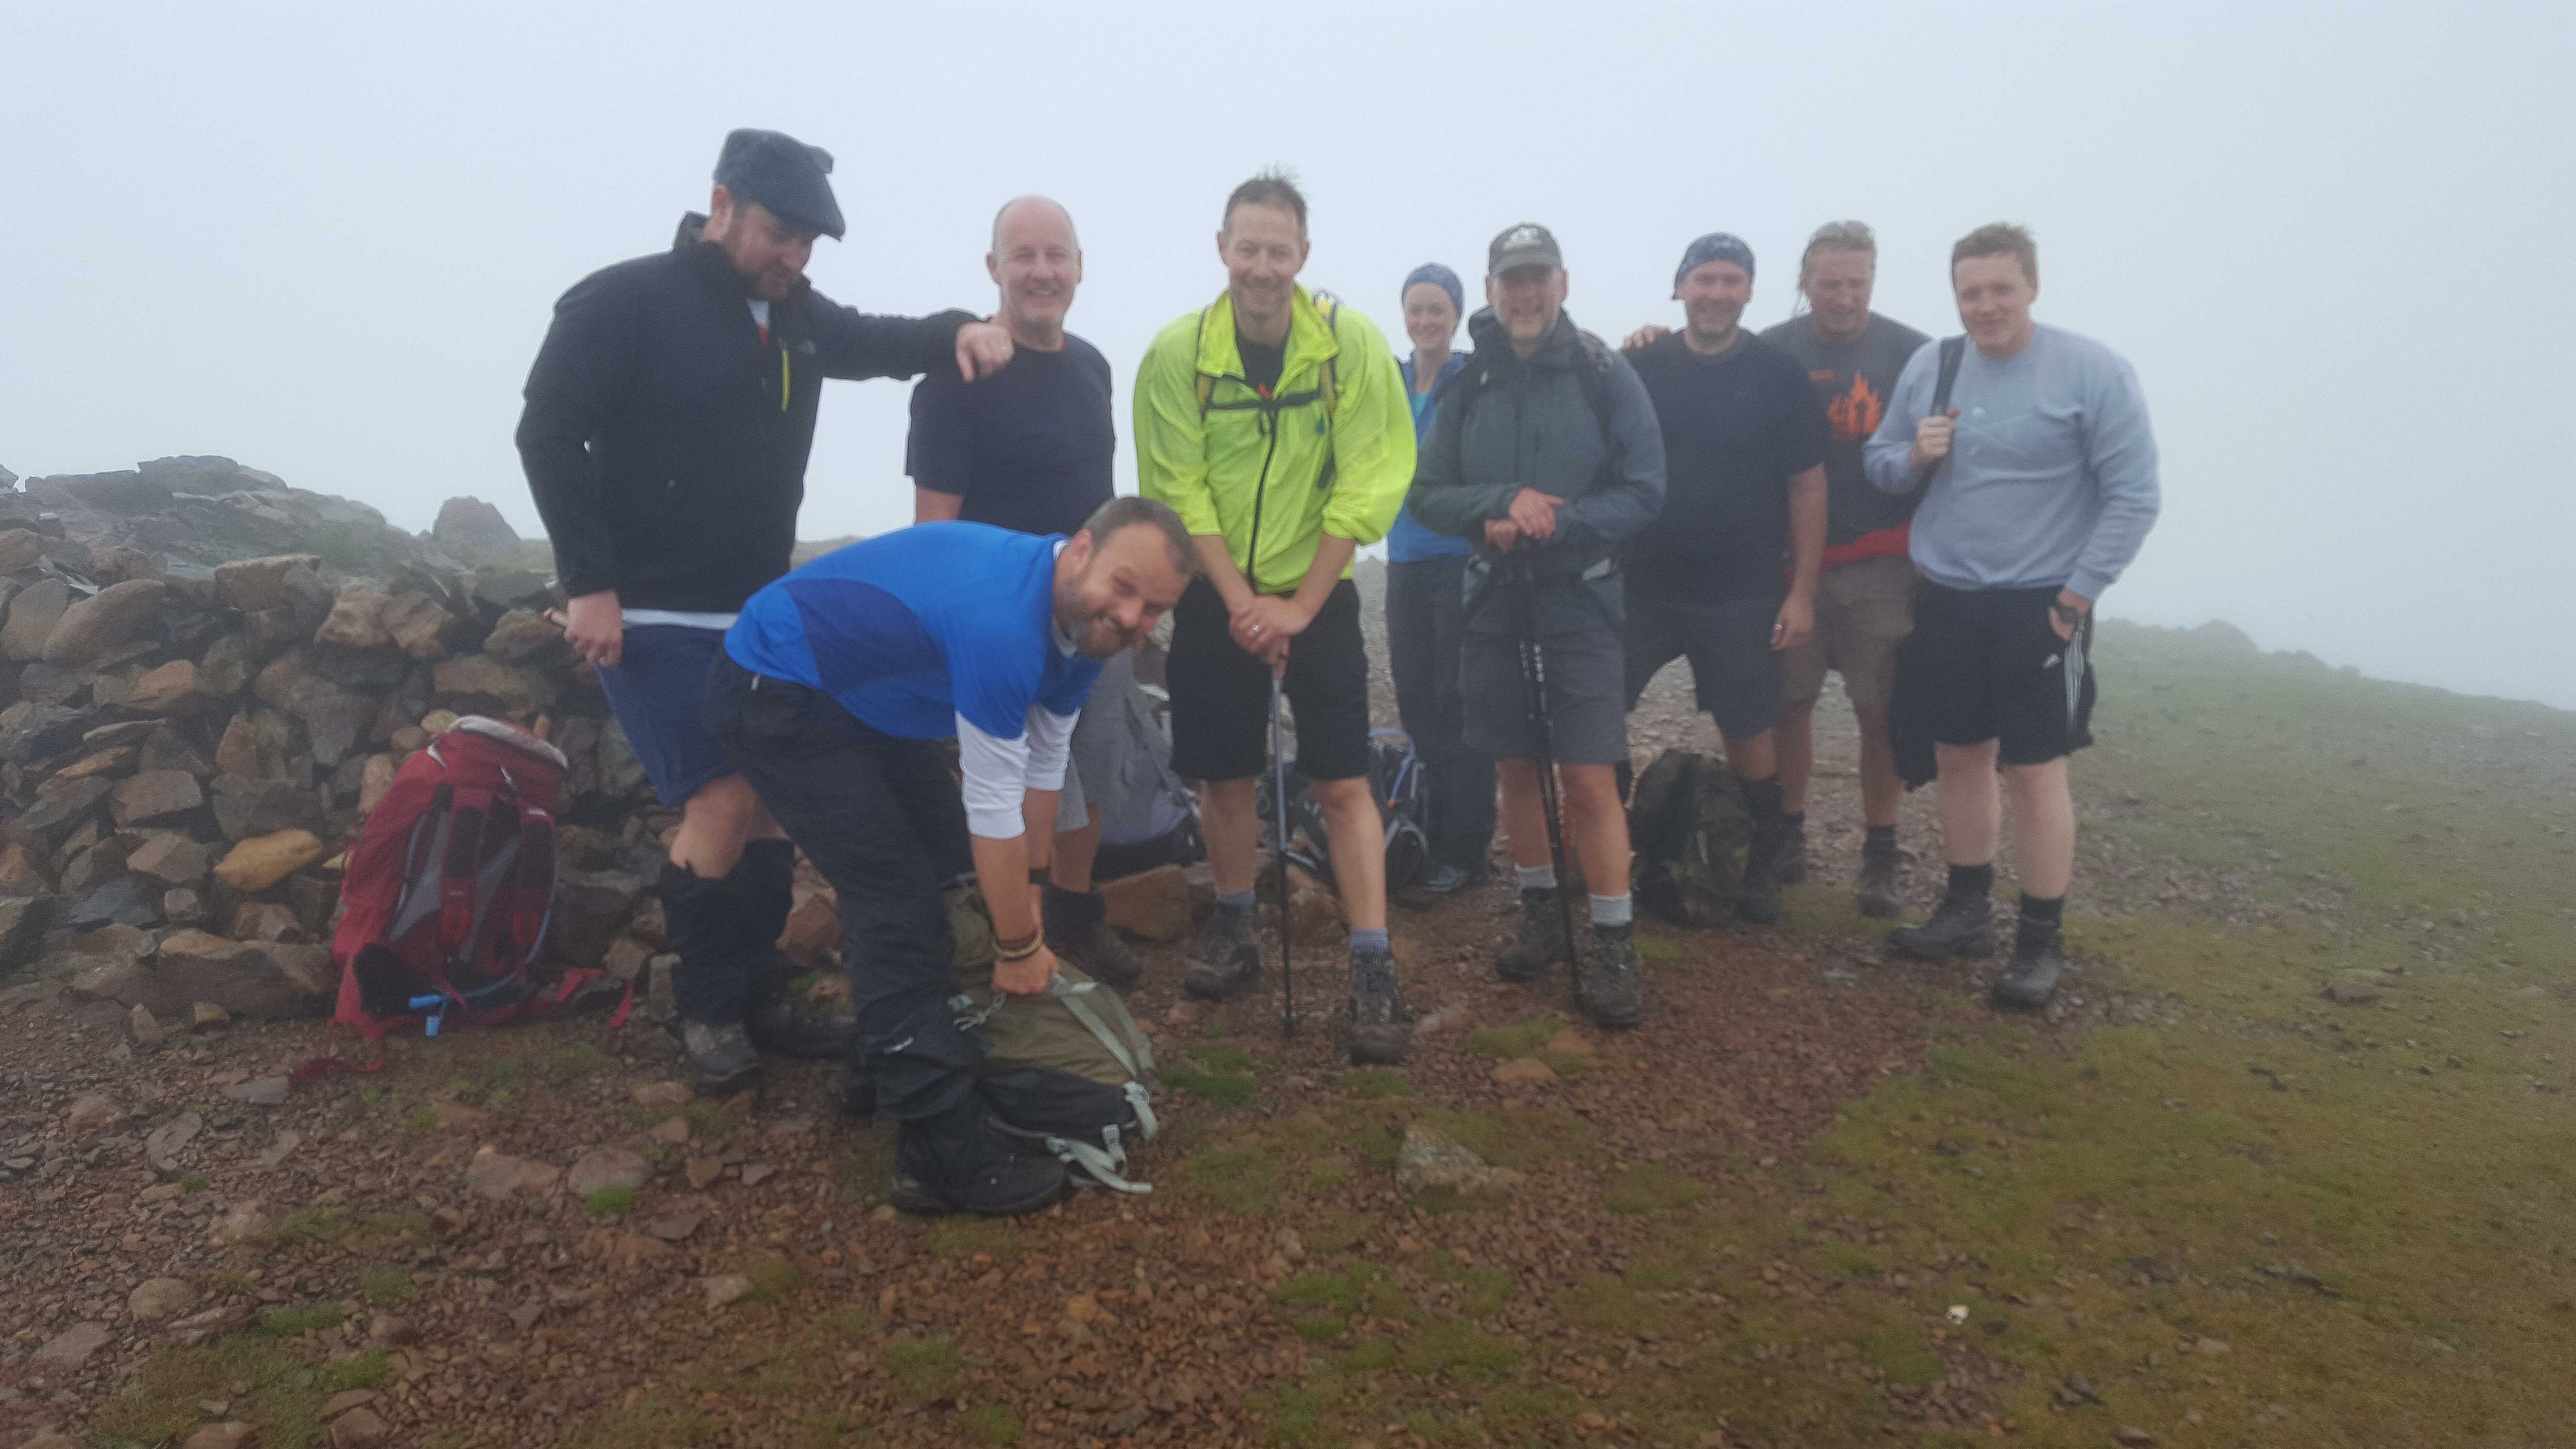 Director of Operations Andy Thomson Completes 10 Peak Challenge.